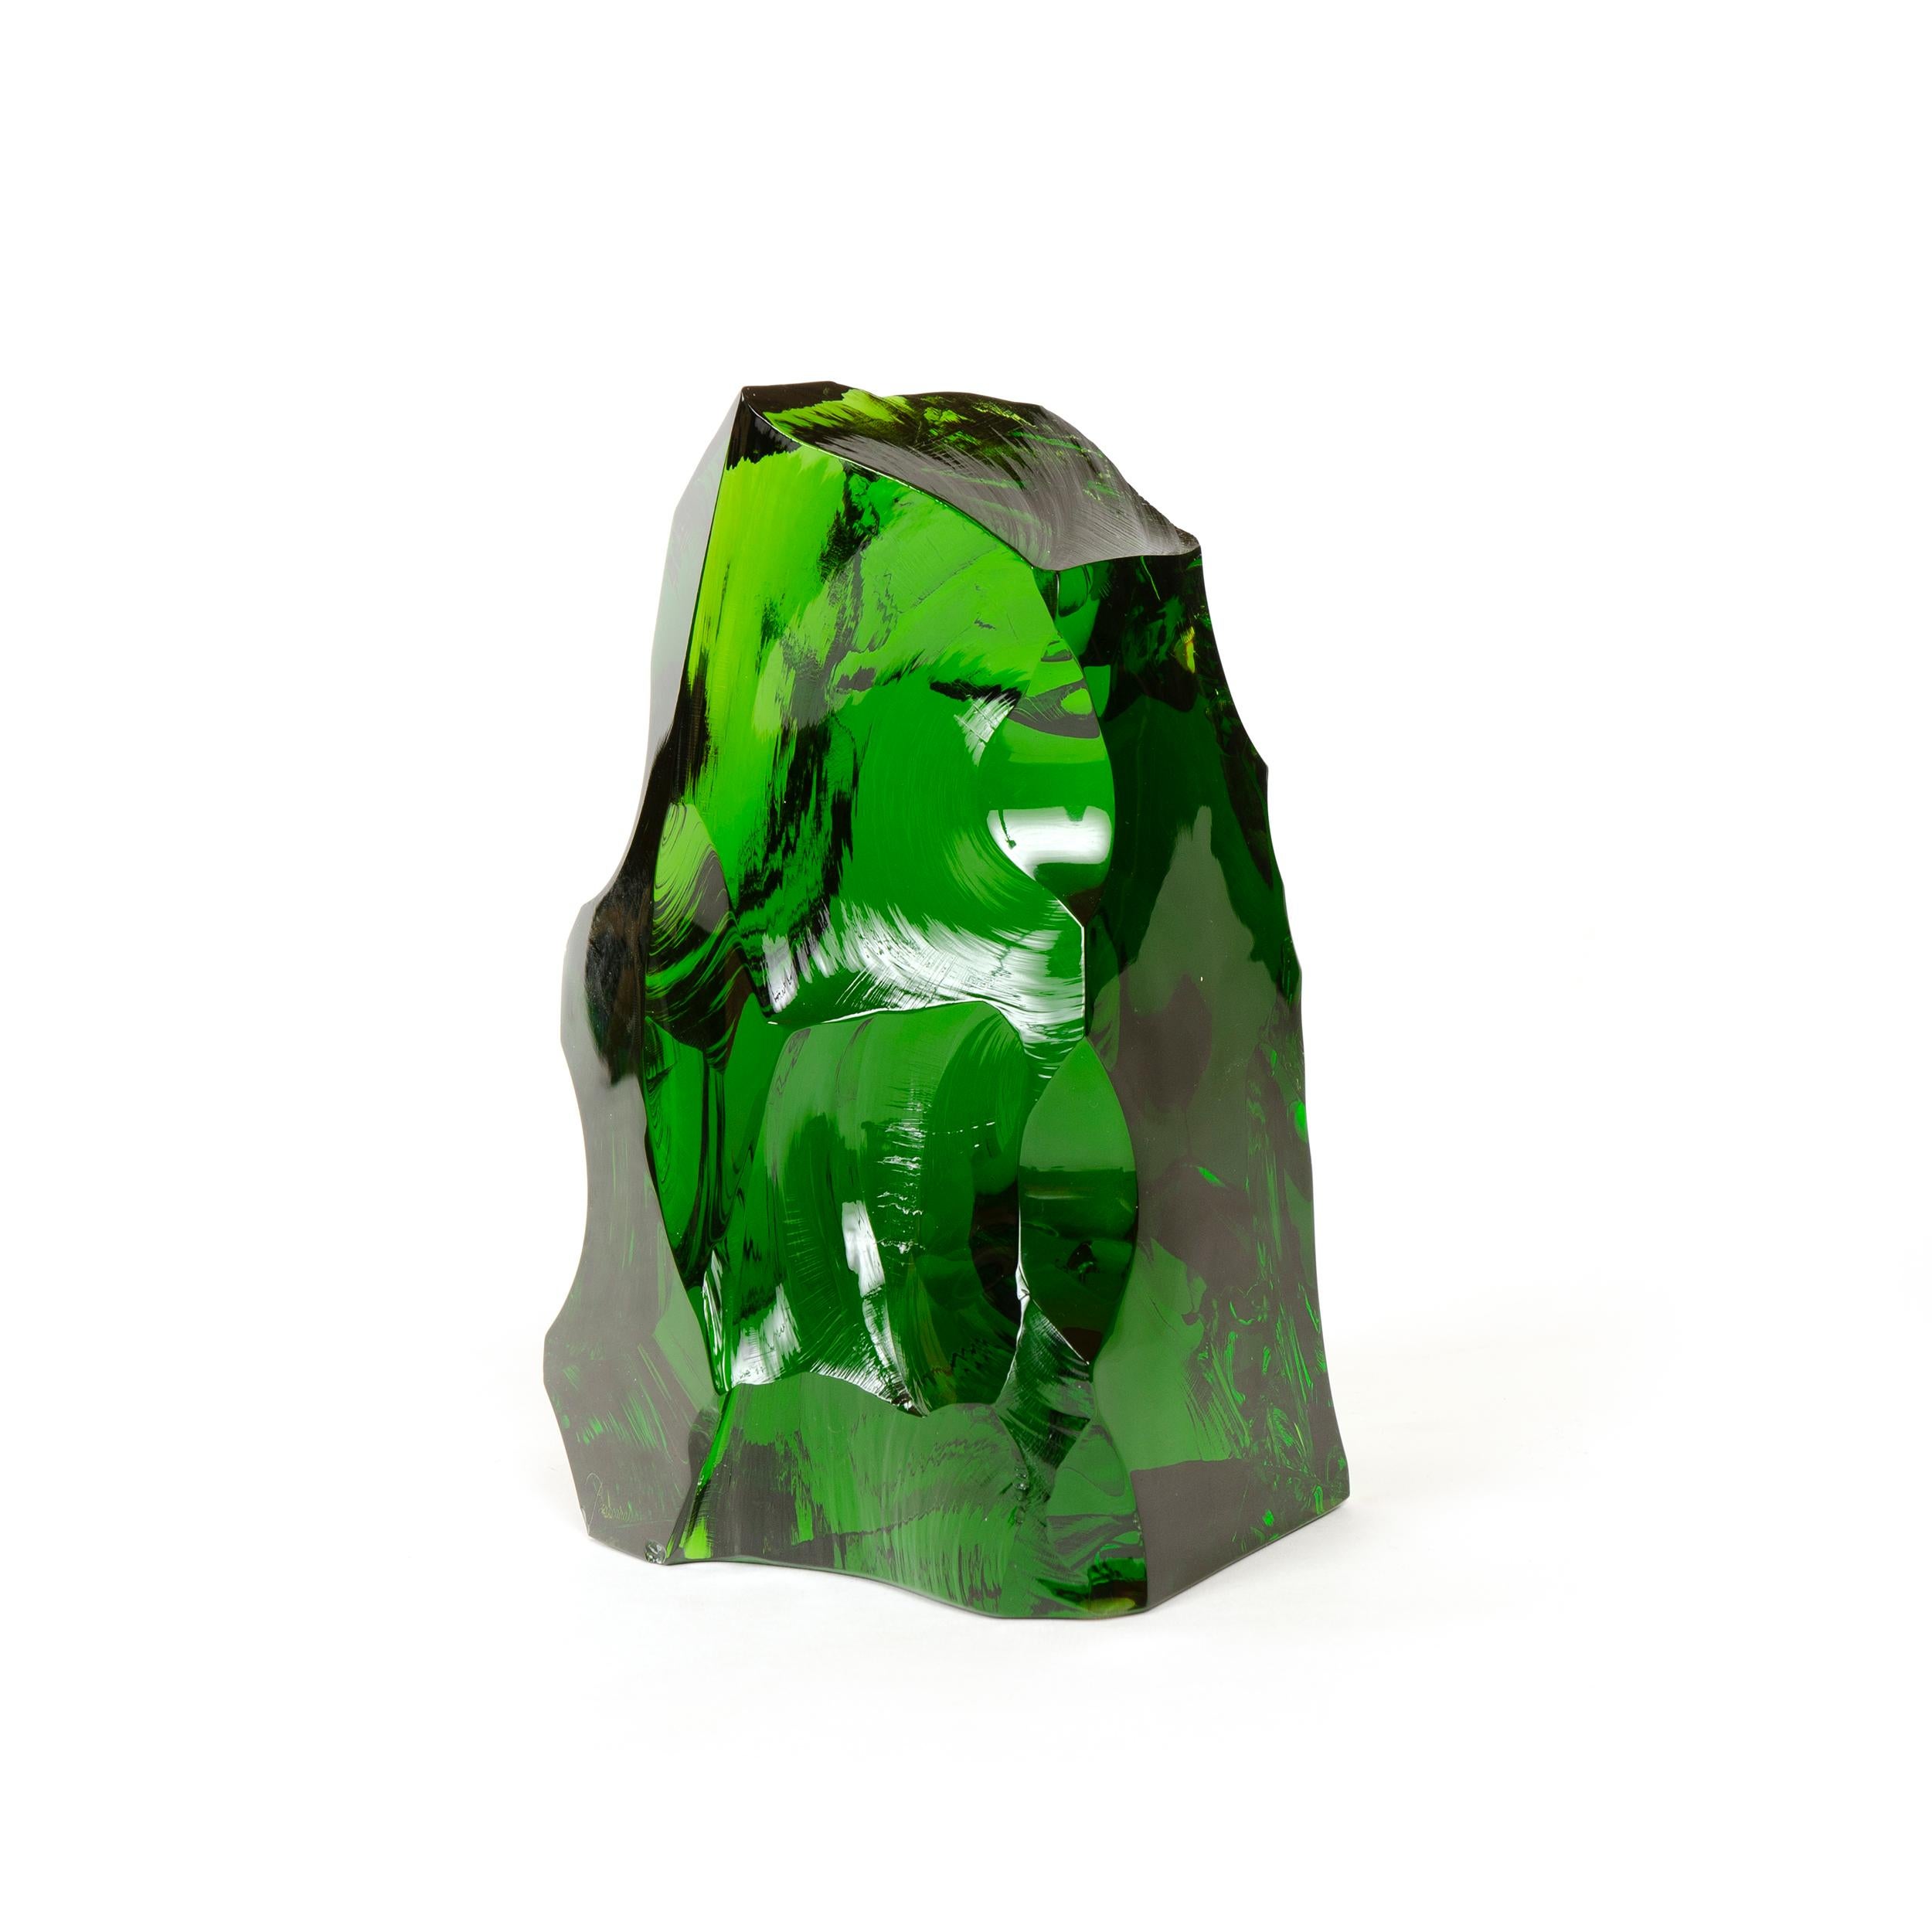 Baccarat sculptural mass of pure glass in a deep emerald green giving the appearance of being rough hewn or naturally formed resembling a glacier. Signed with an etched Baccarat signature in script as well as the company’s circular mercury ink stamp.